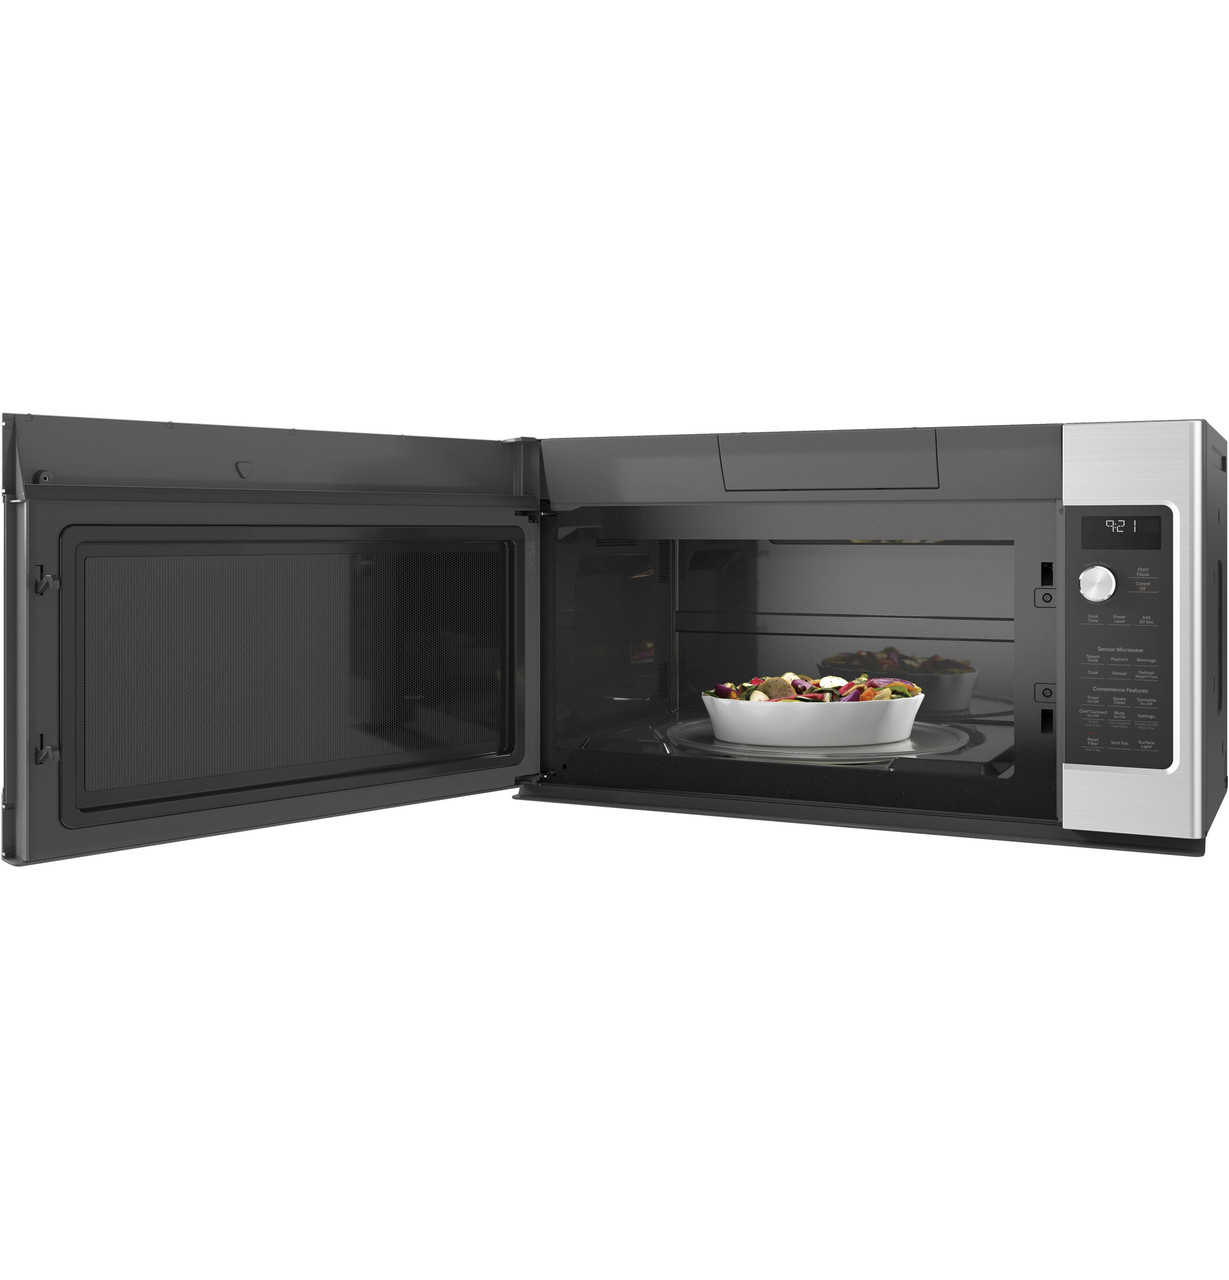 Grand View Microwave Oven For Small Living Space - Tuvie Design